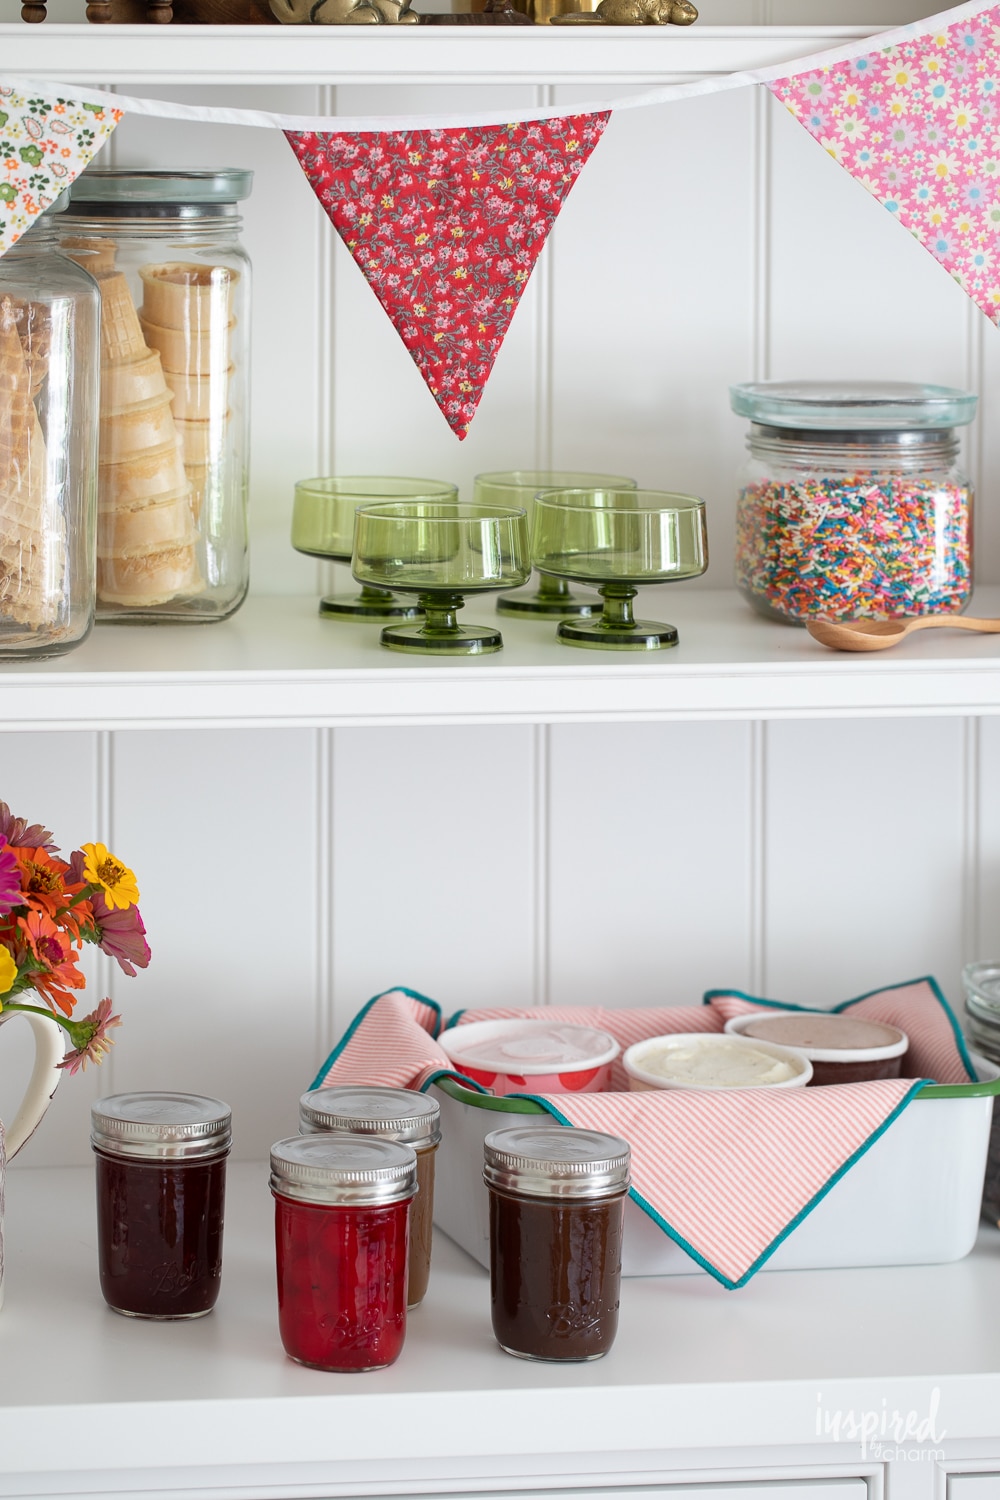 shelves filled with toppings, cones, and containers for an ice cream sundae bar.